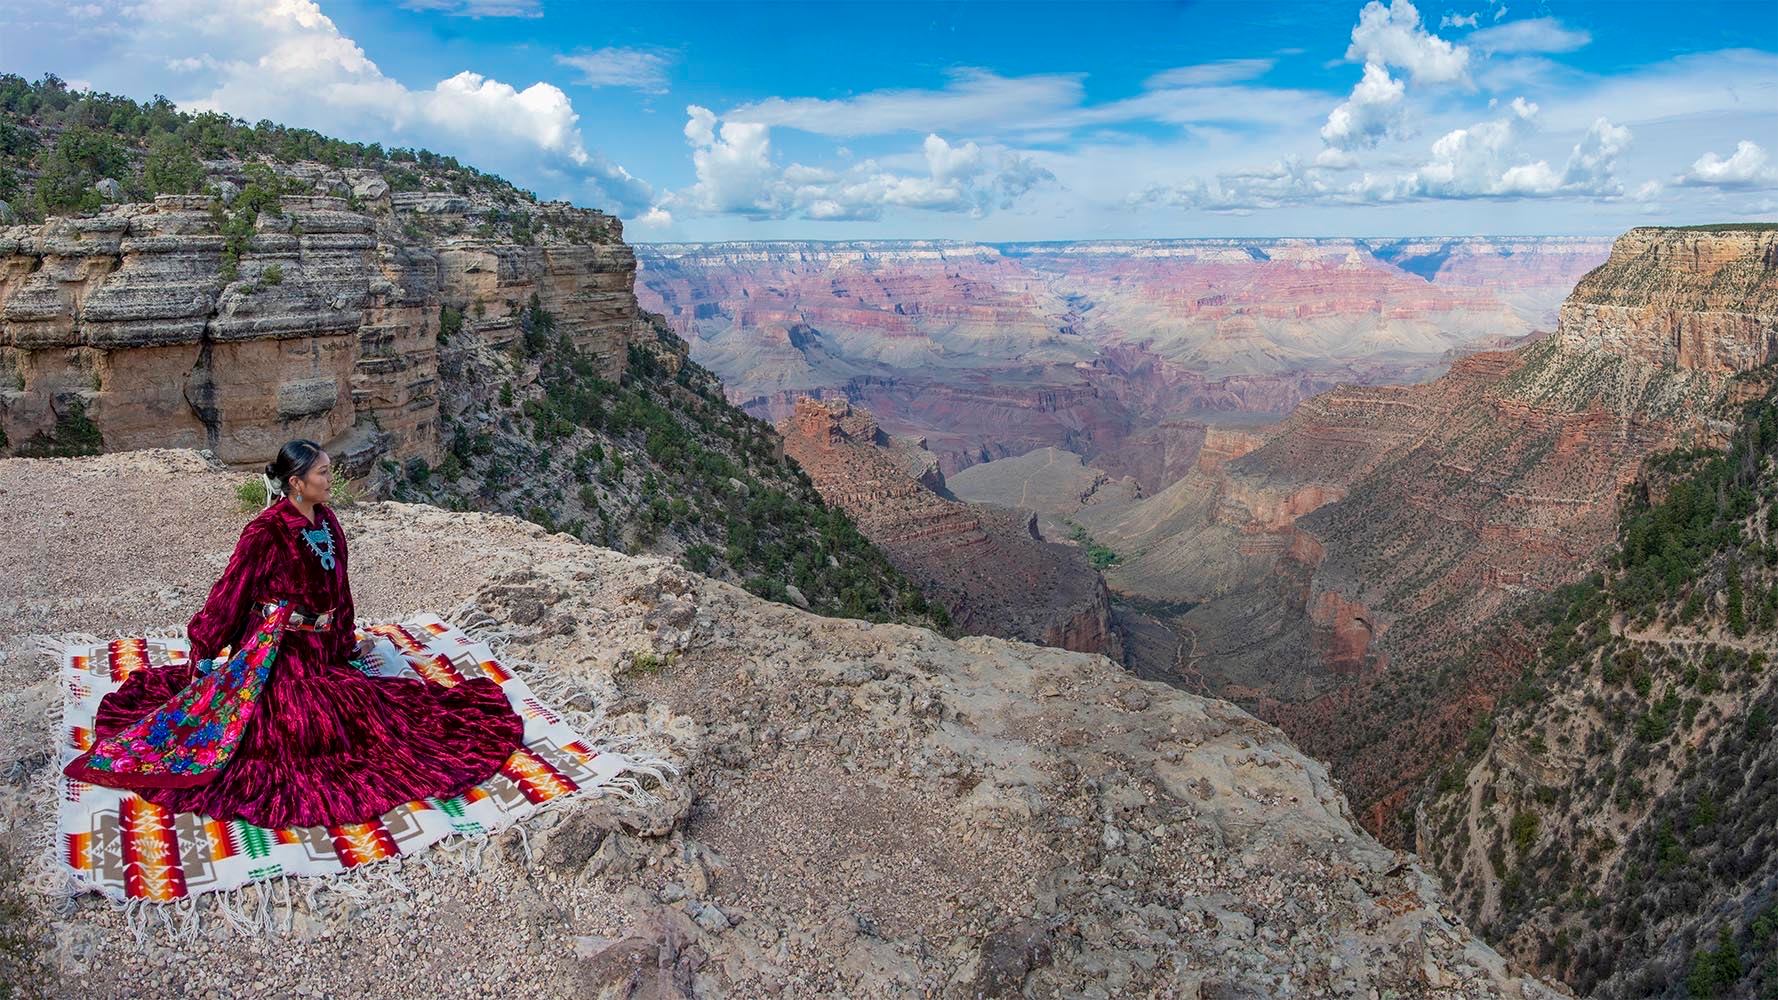 Native American woman in beautiful traditional long red dress sitting on a blanket and looking over the Grand Canyon.